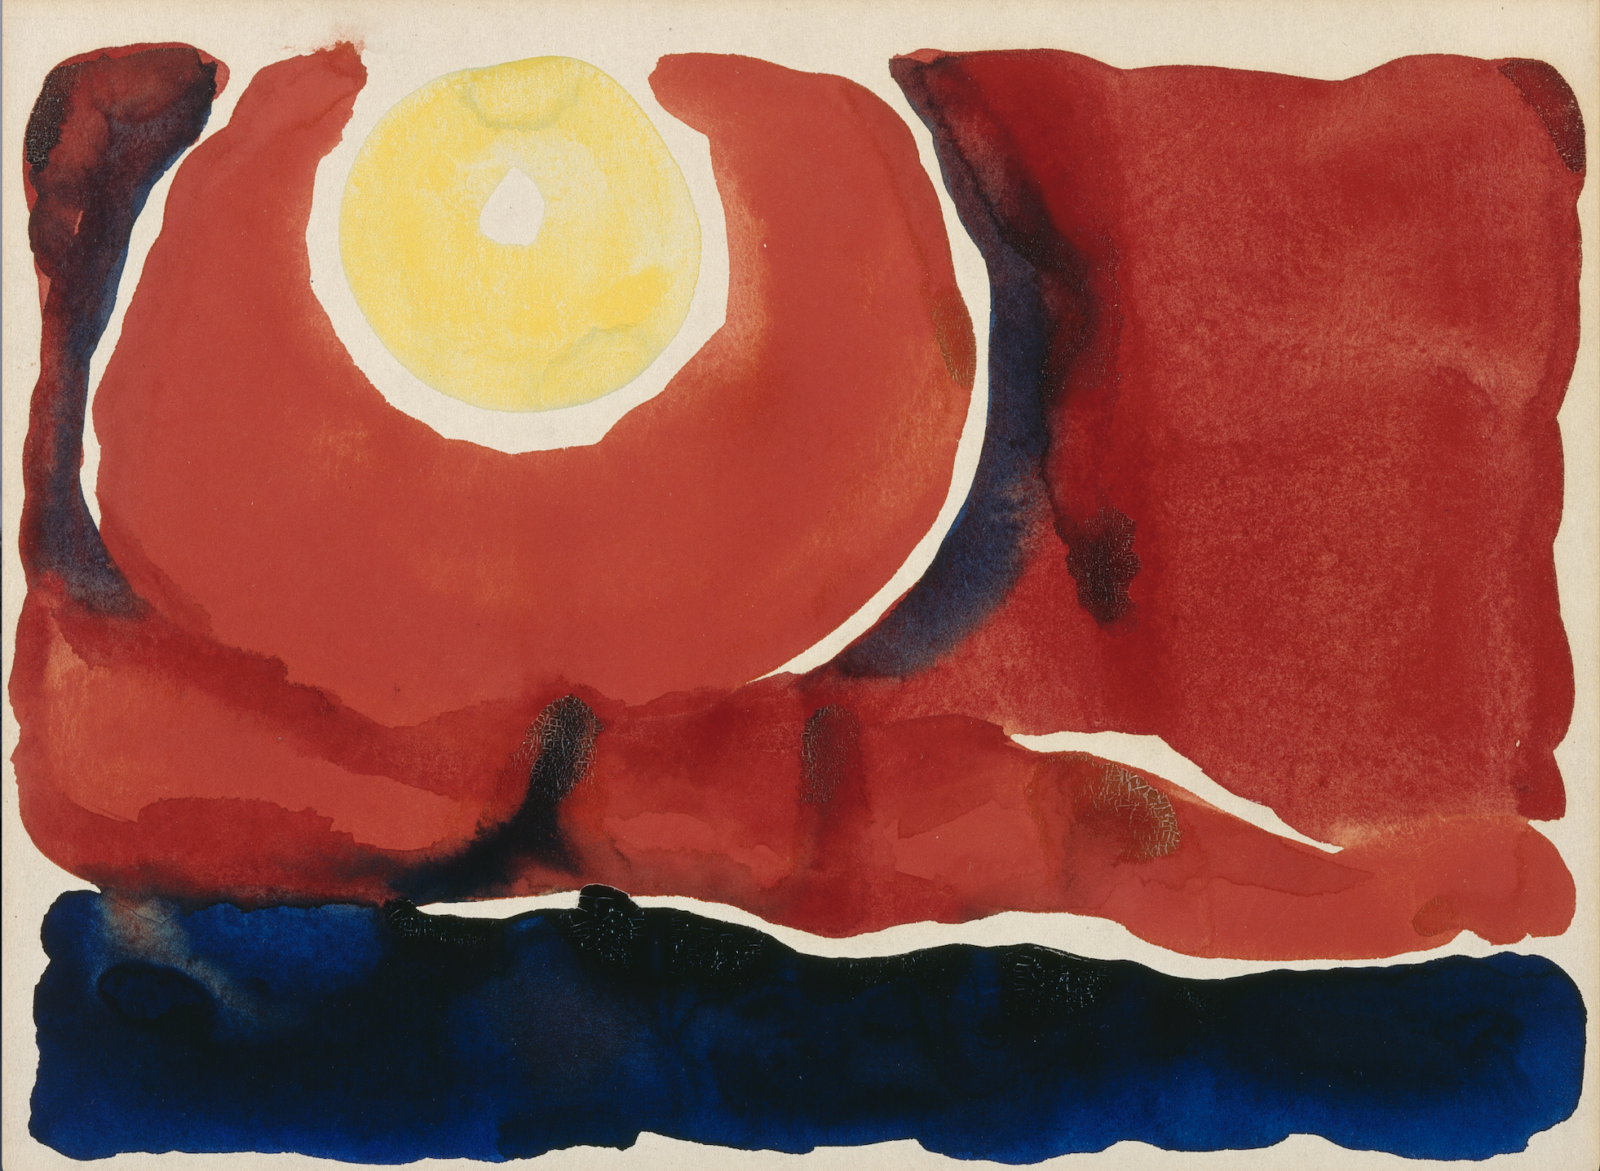 Watercolor painting composed of red and blue primary colors with sharp, clean edges delineated by the white of the paper, with a yellow sphere in the top left representing a sun, with red rings radiating from it and a blue horizon at the bottom